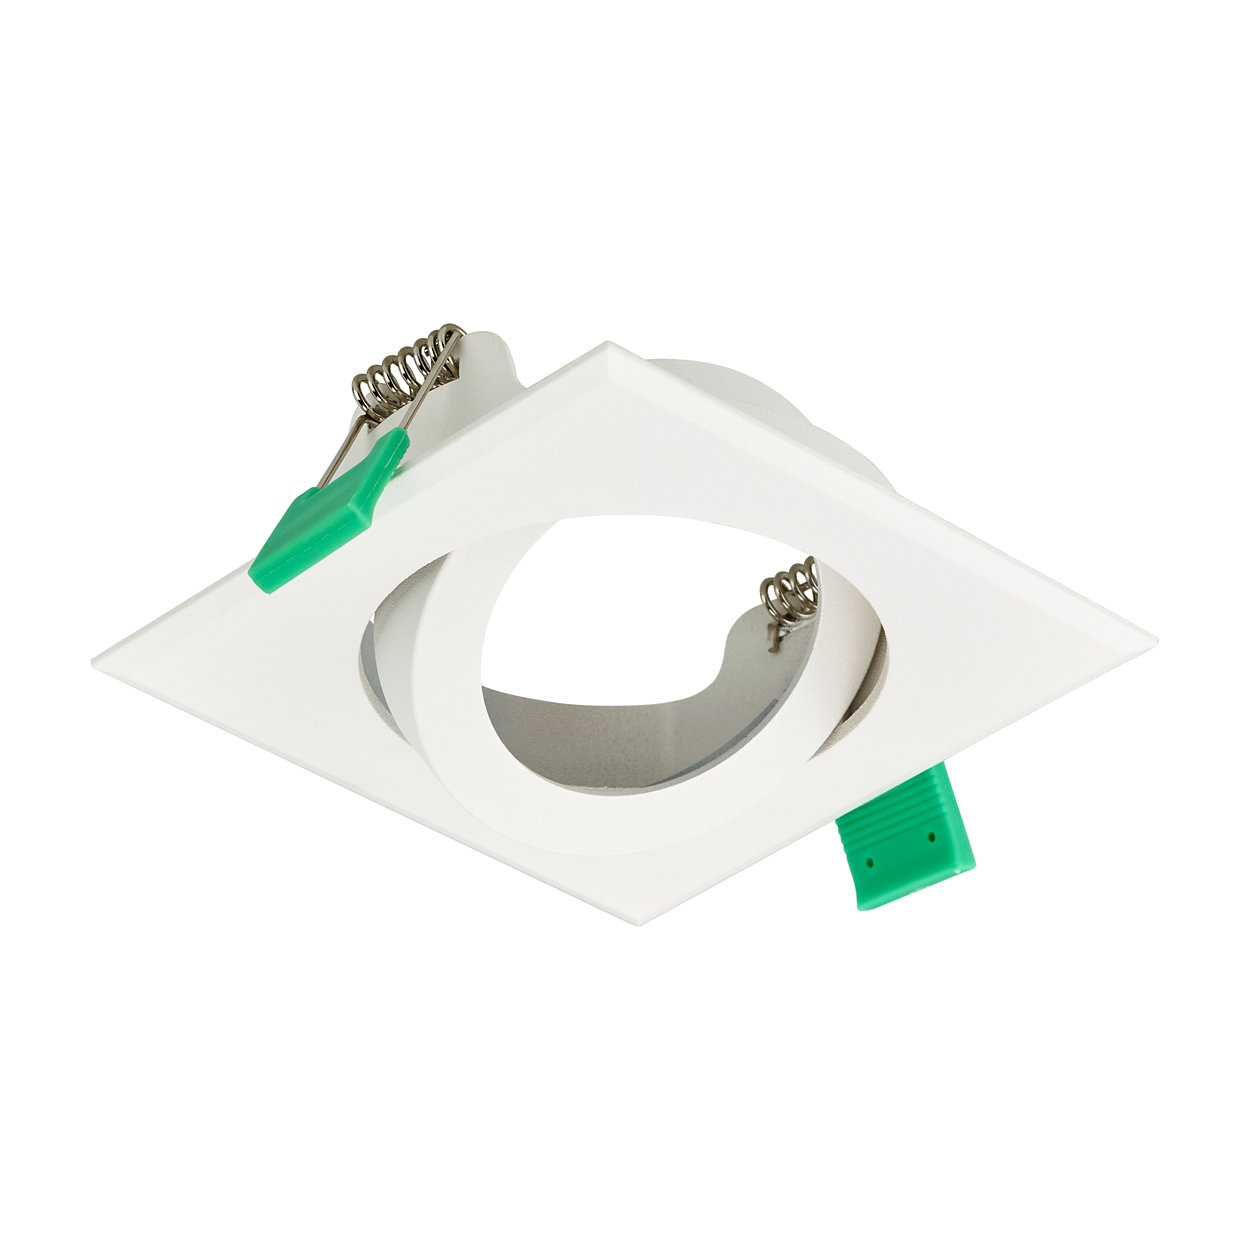 CoreLine Recessed Spot gen2 – for every project, where light really matters